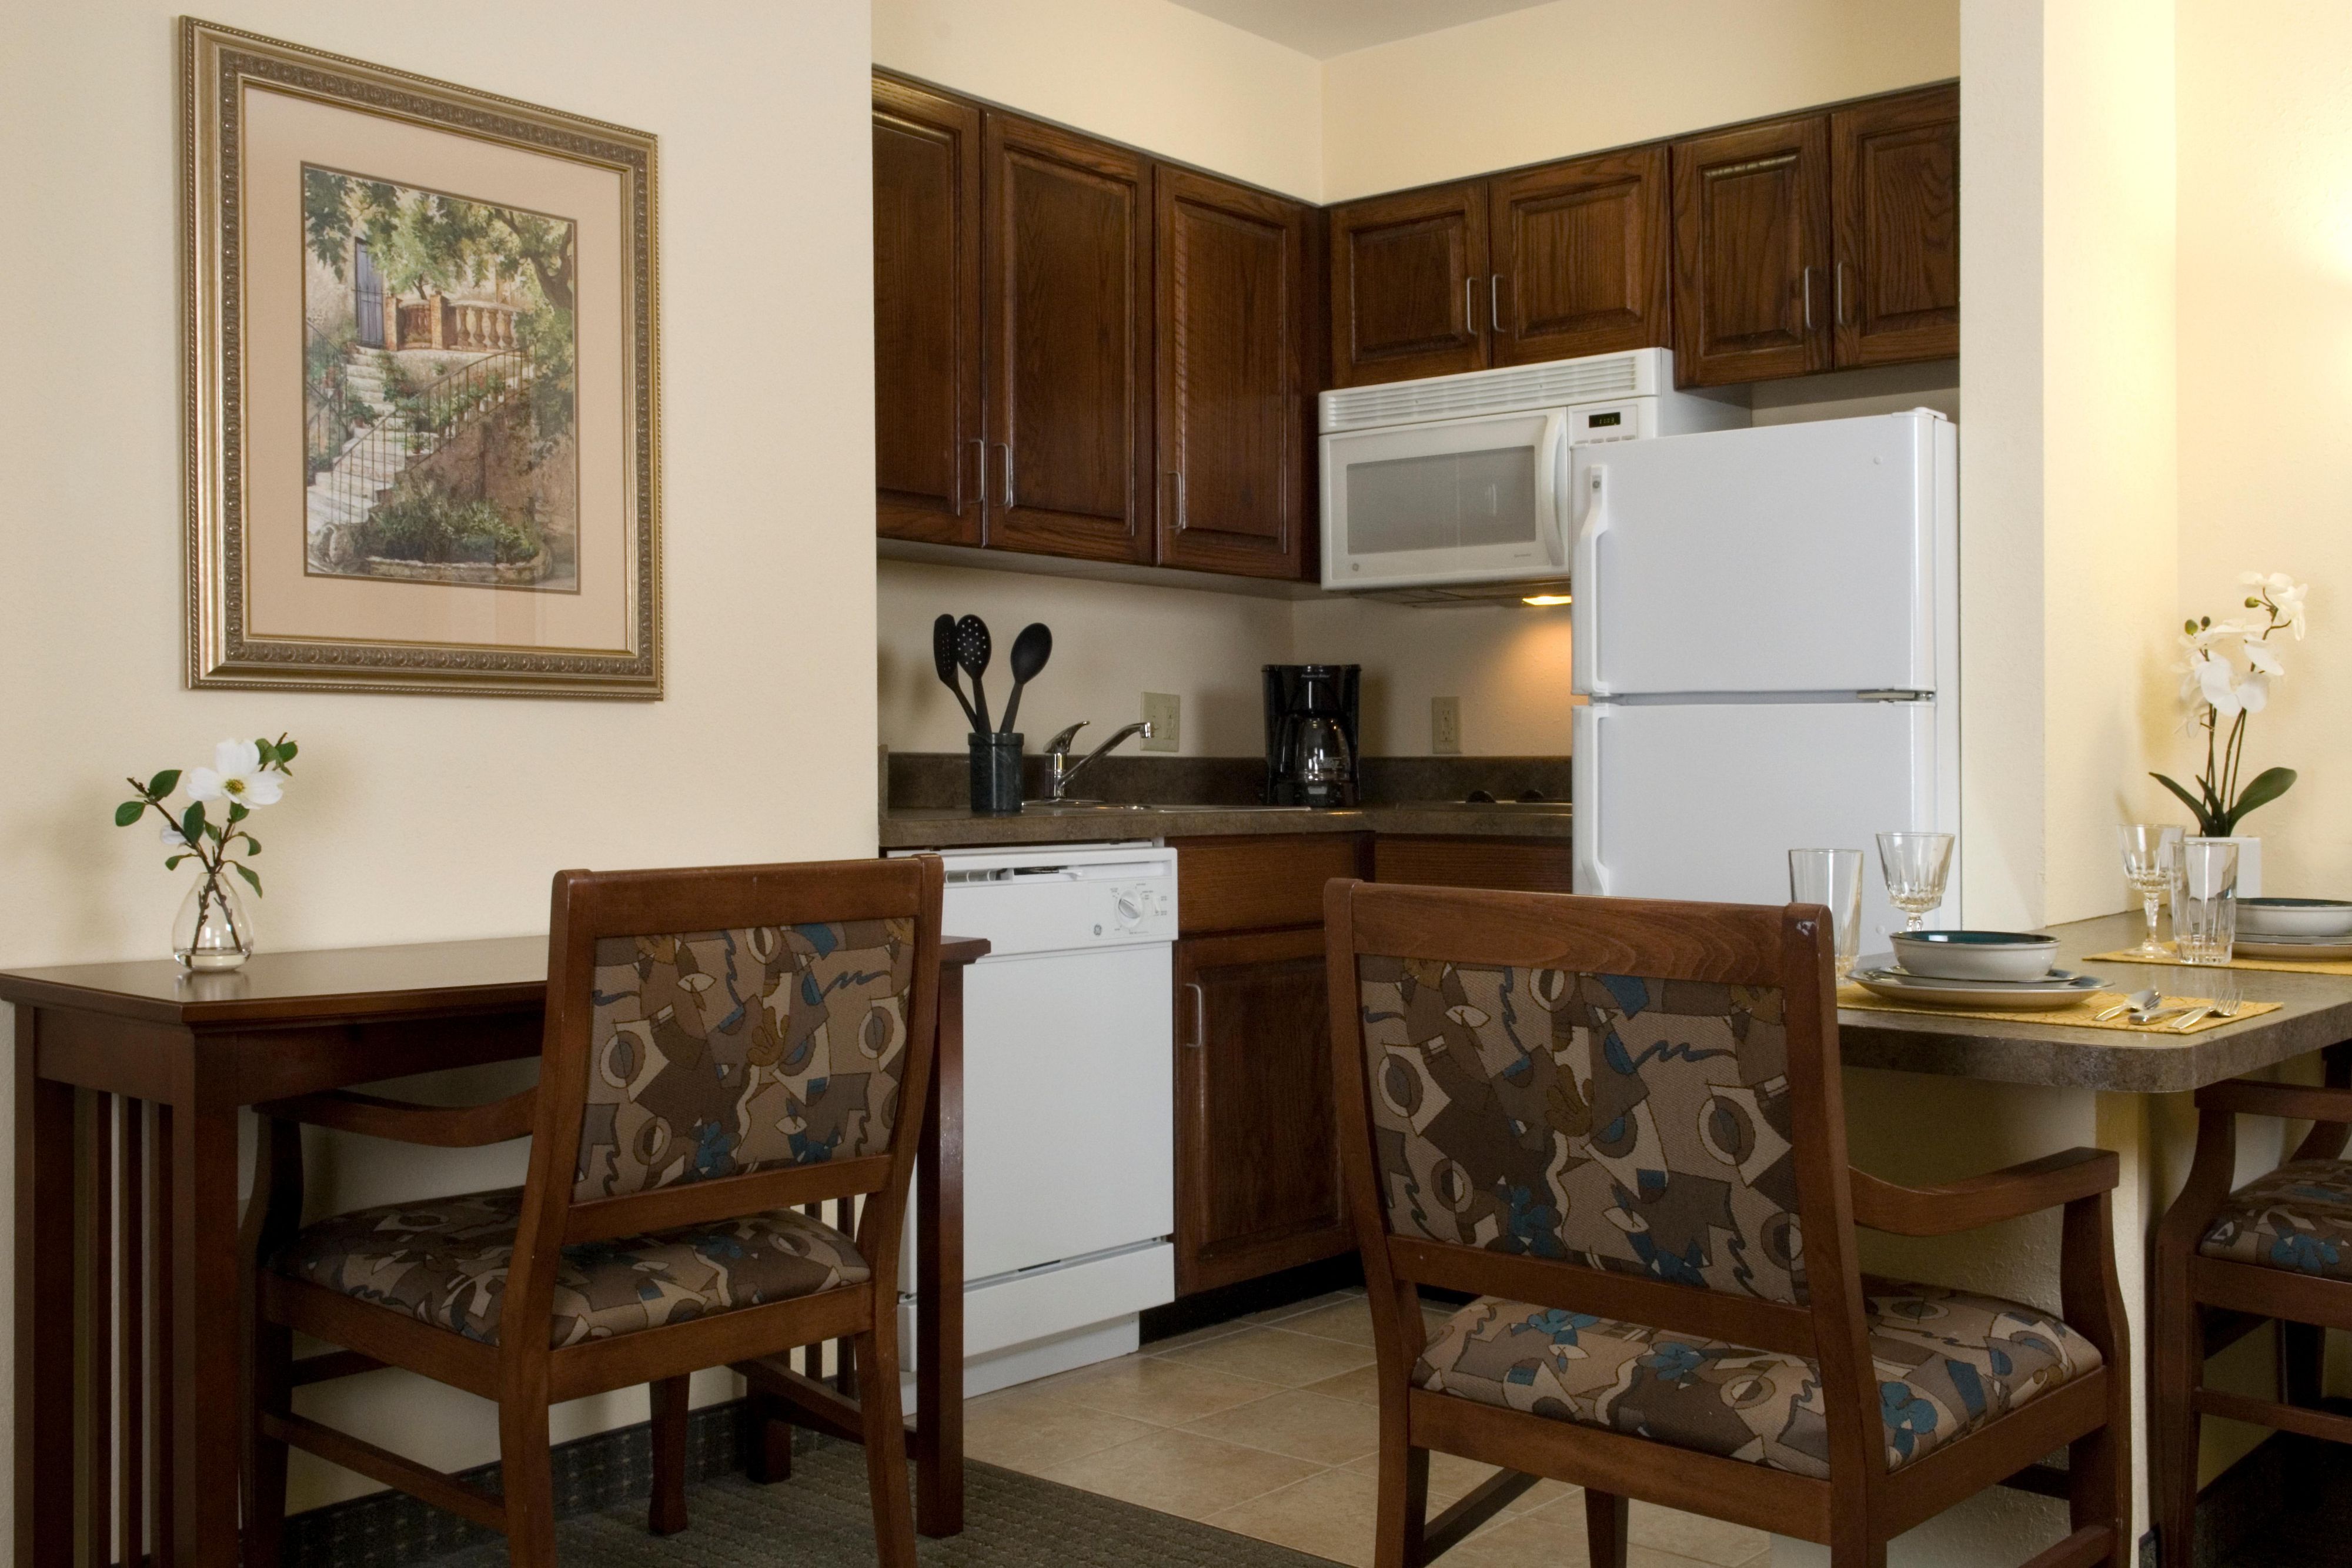 Staying for 1 night or 30 nights, you will find everything you need to feel at home. Our fully equipped kitchens allow you the flexibility to stay in and cook your favorite meal without the hassle of going out for dinner. Forgot something? We feature a wide variety of grab and go items in our pantry.  